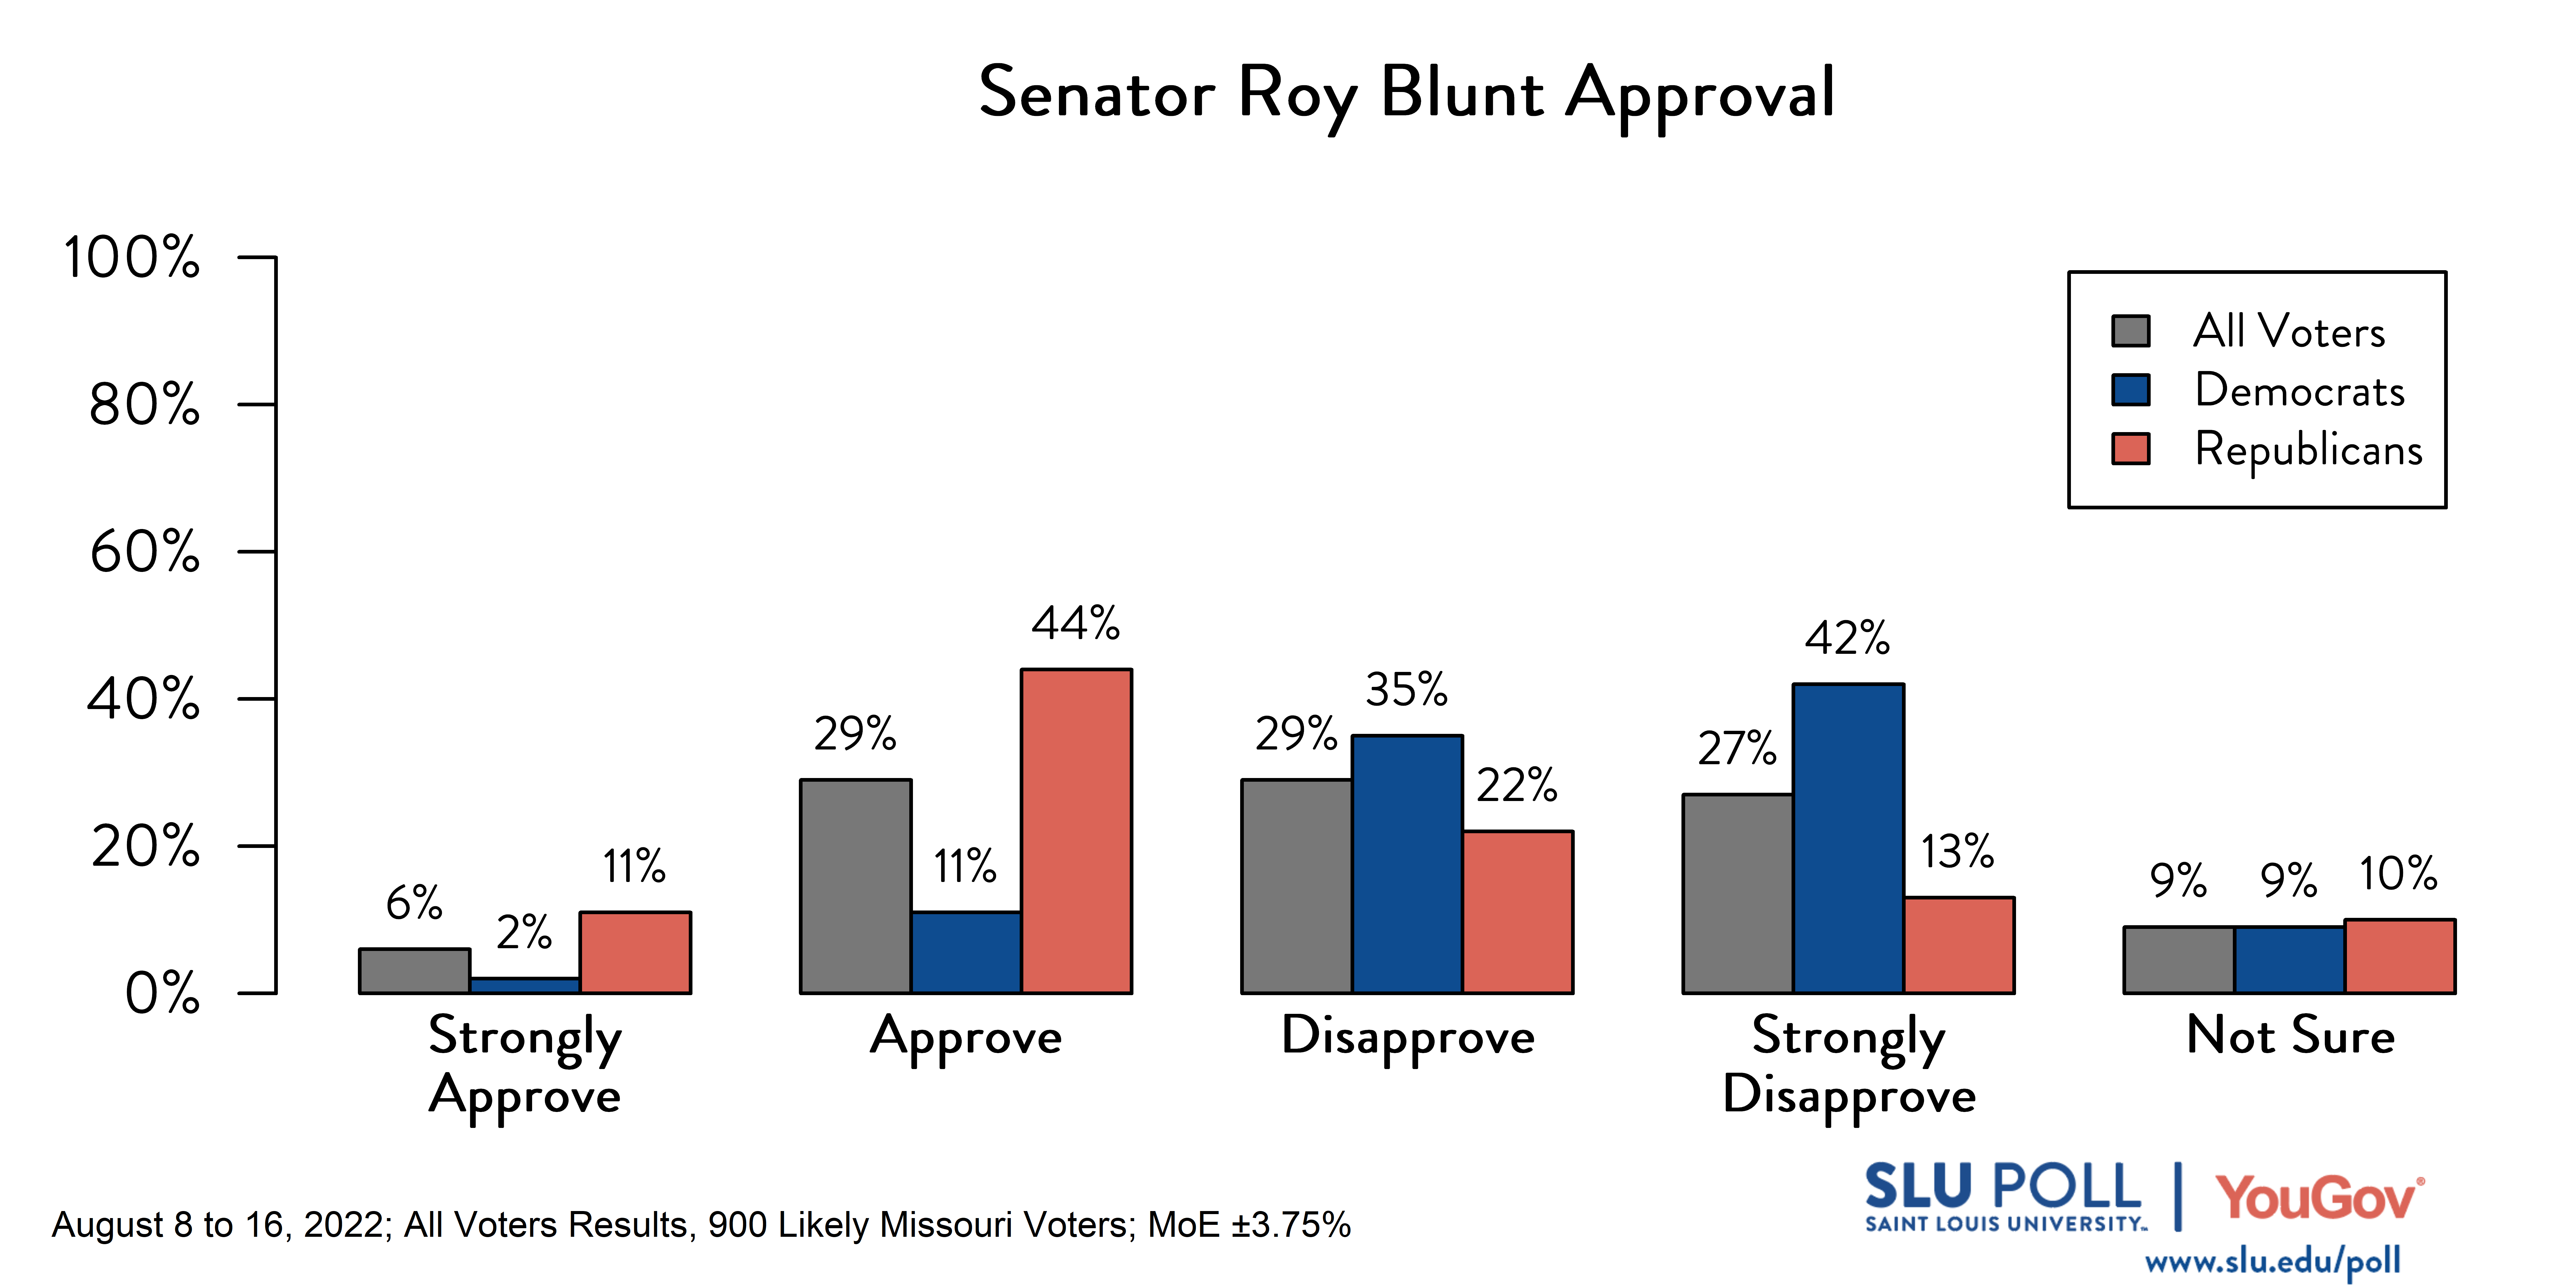 Likely voters' responses to 'Do you approve or disapprove of the way each is doing their job: Senator Roy Blunt?': 6% Strongly approve, 29% Approve, 29% Disapprove, 27% Strongly disapprove, and 9% Not sure. Democratic voters' responses: ' 2% Strongly approve, 11% Approve, 35% Disapprove, 42% Strongly disapprove, and 9% Not sure. Republican voters' responses: 11% Strongly approve, 44% Approve, 22% Disapprove, 13% Strongly disapprove, and 10% Not sure. 